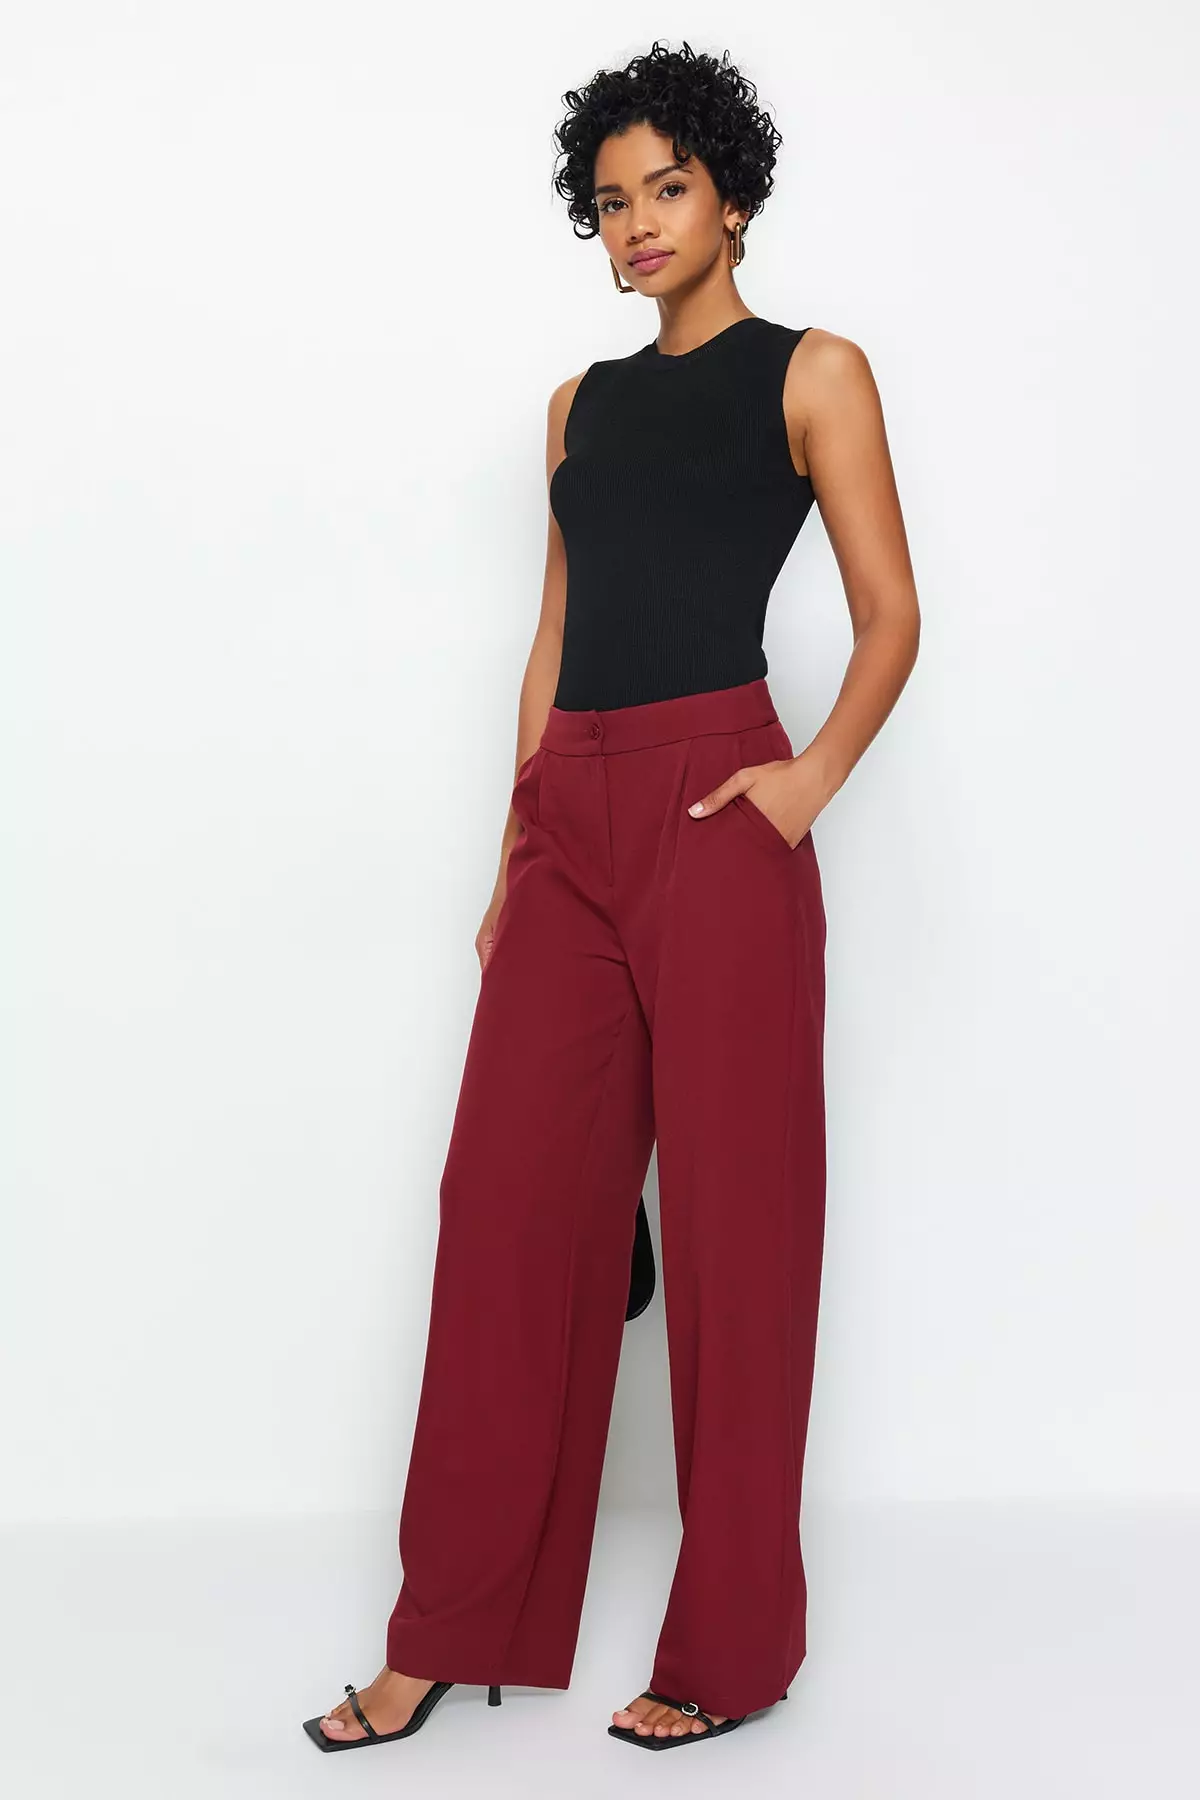 Buy Claret Red Slim Fit Cotton Pants by  with Free Shipping